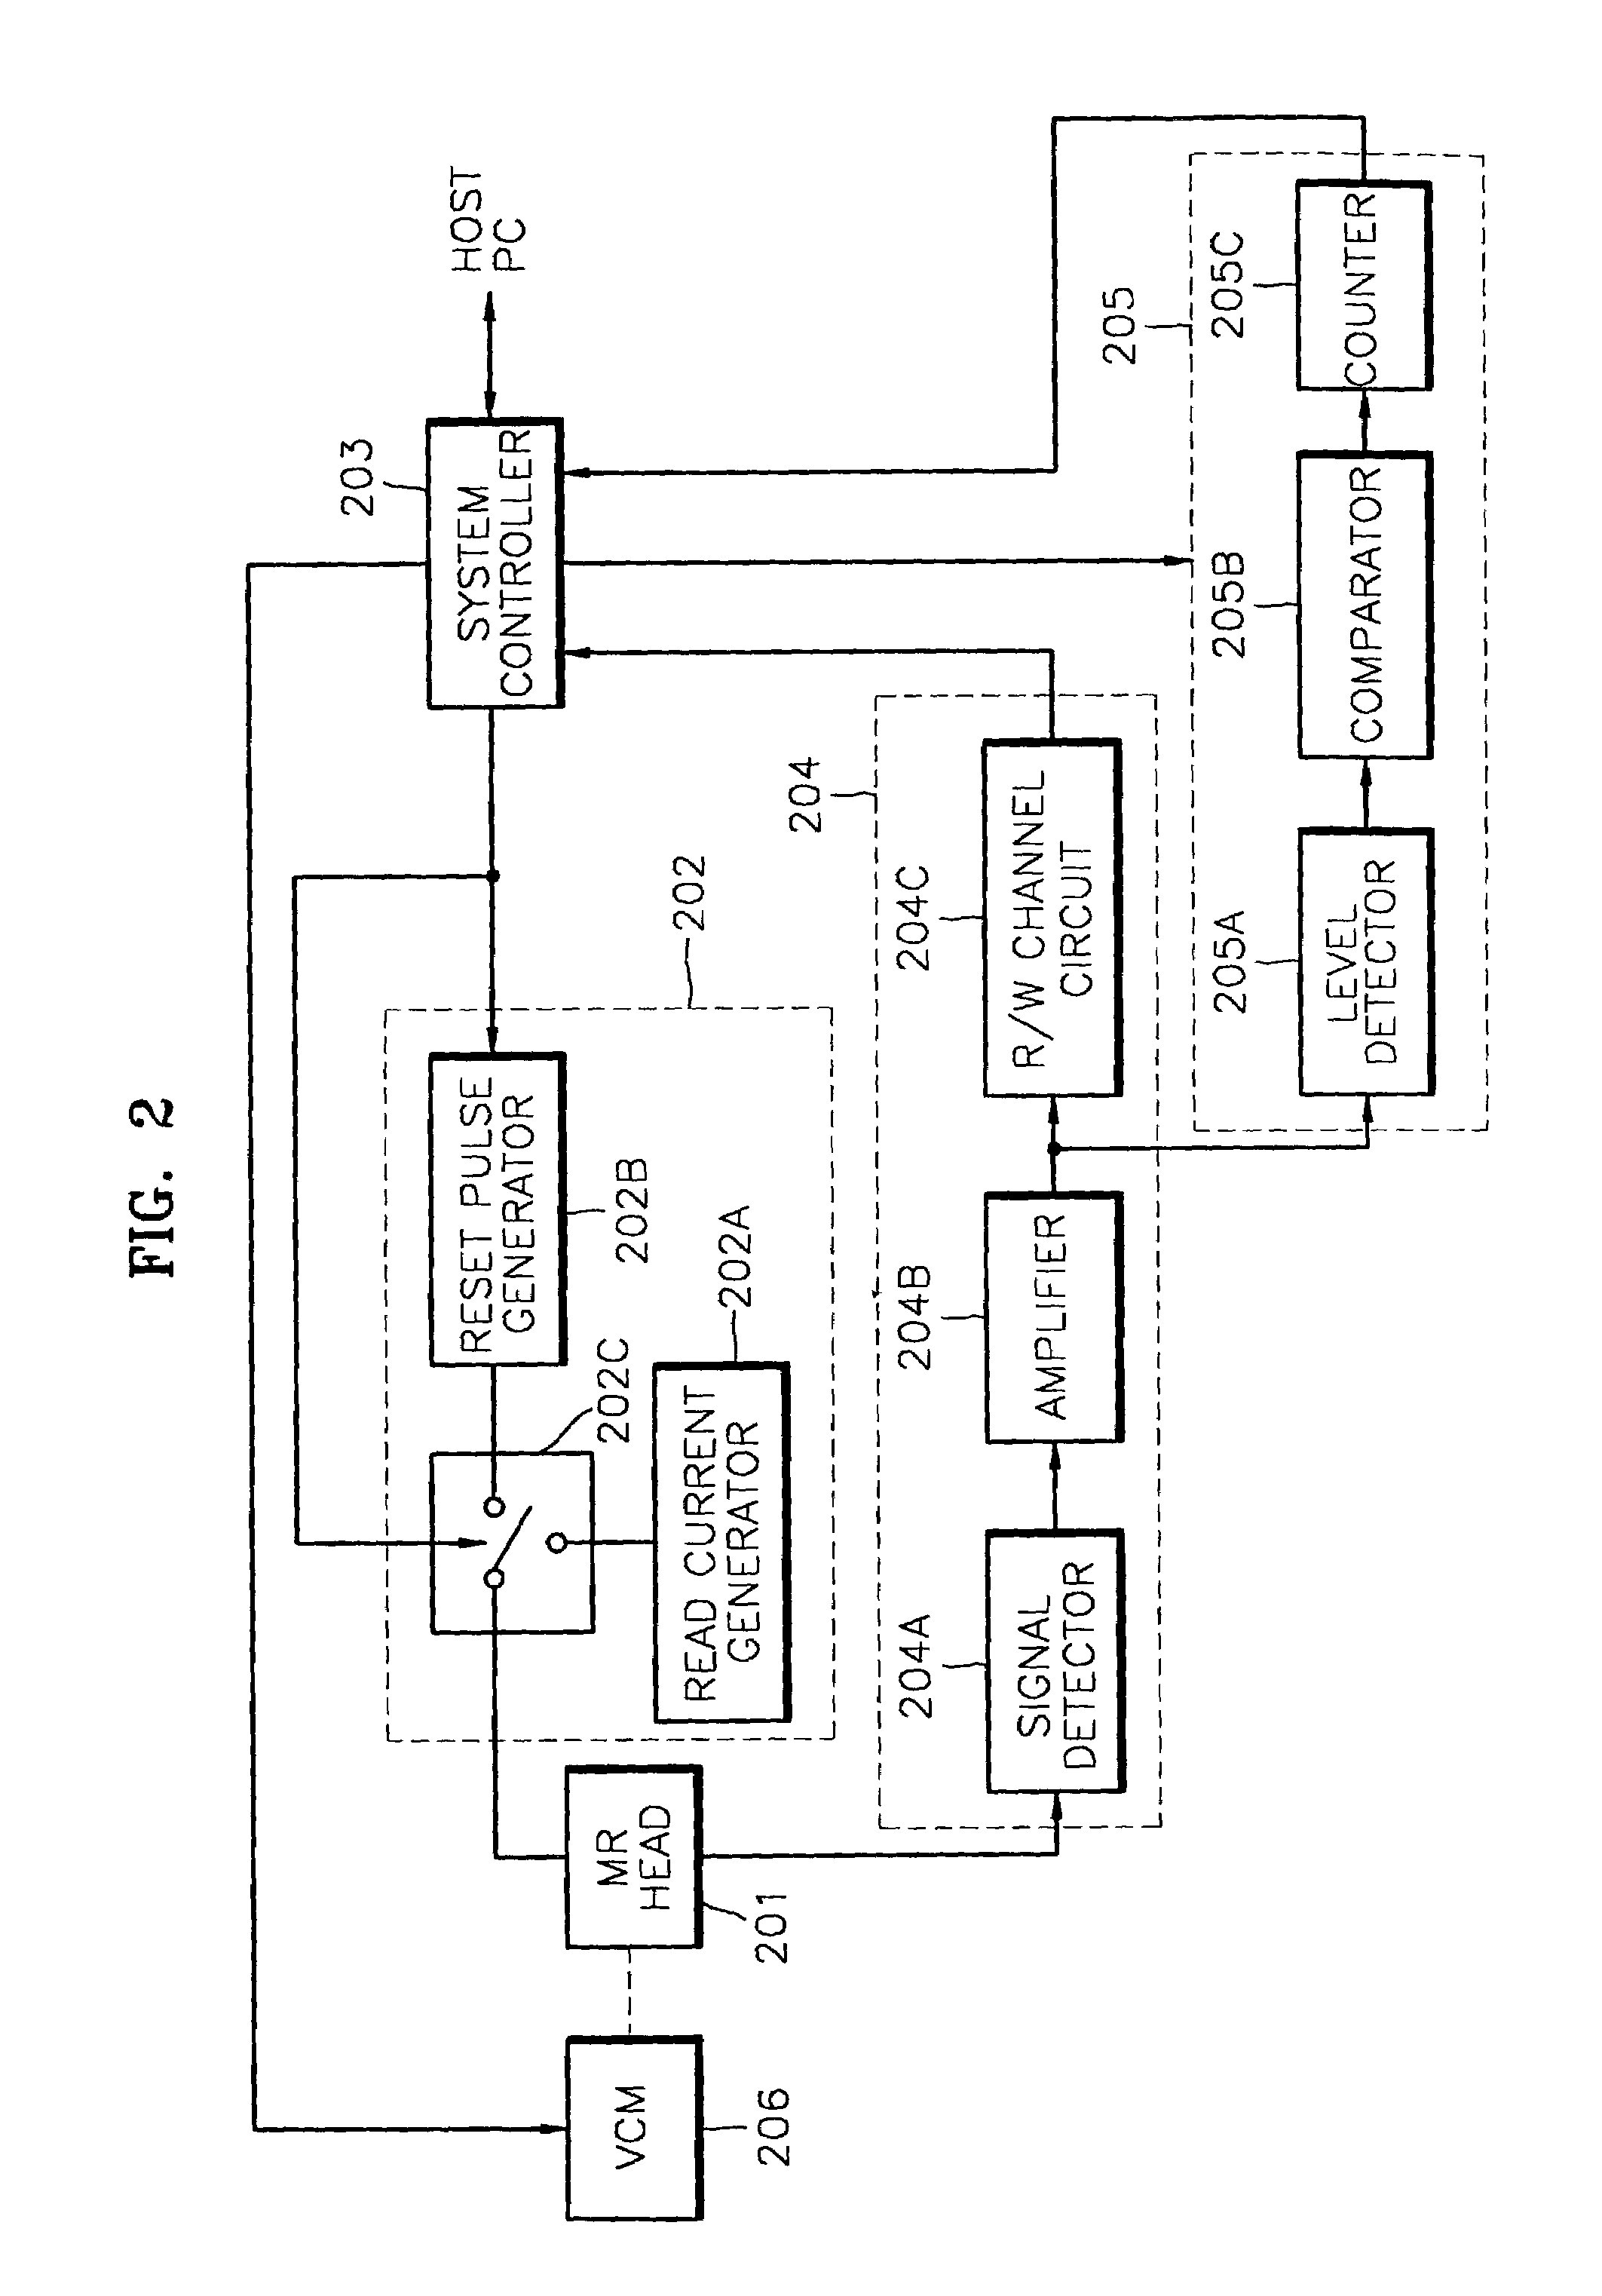 Method and apparatus to control head instability in a data storage system